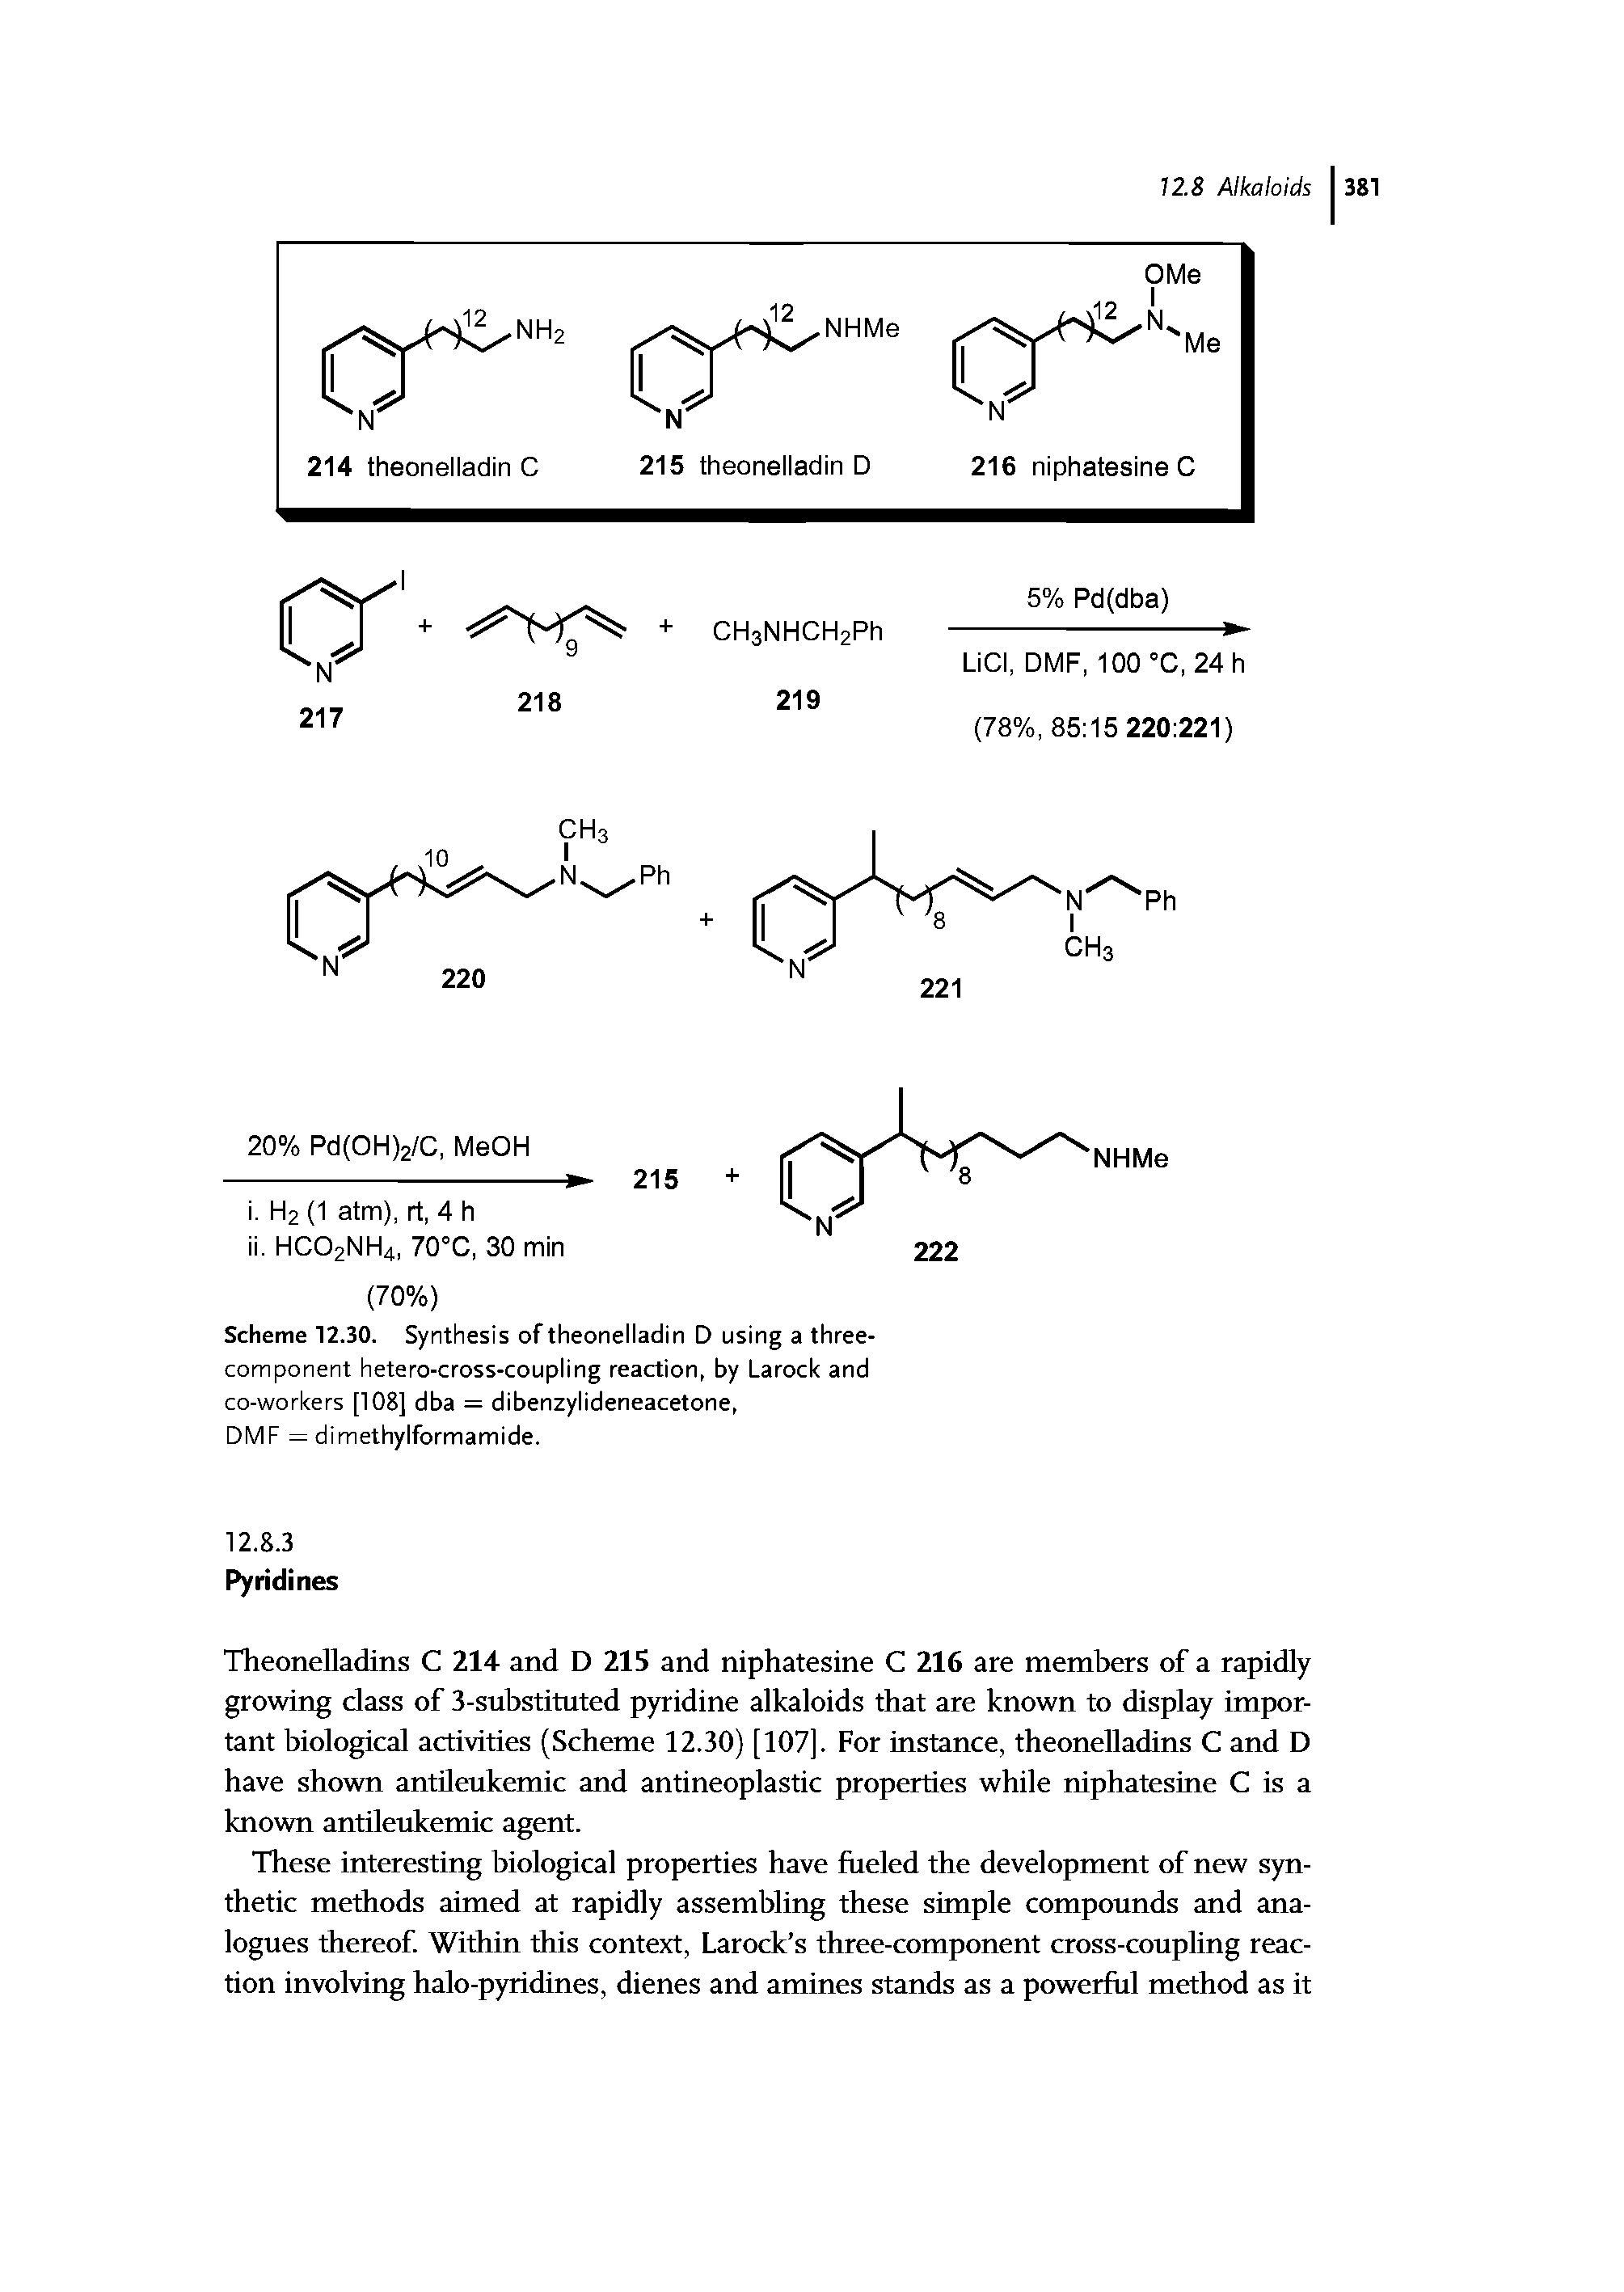 Scheme 12.30. Synthesis of theonelladin D using a three-component hetero-cross-coupling reaction, by Larock and co-workers [108] dba = dibenzylideneacetone,...